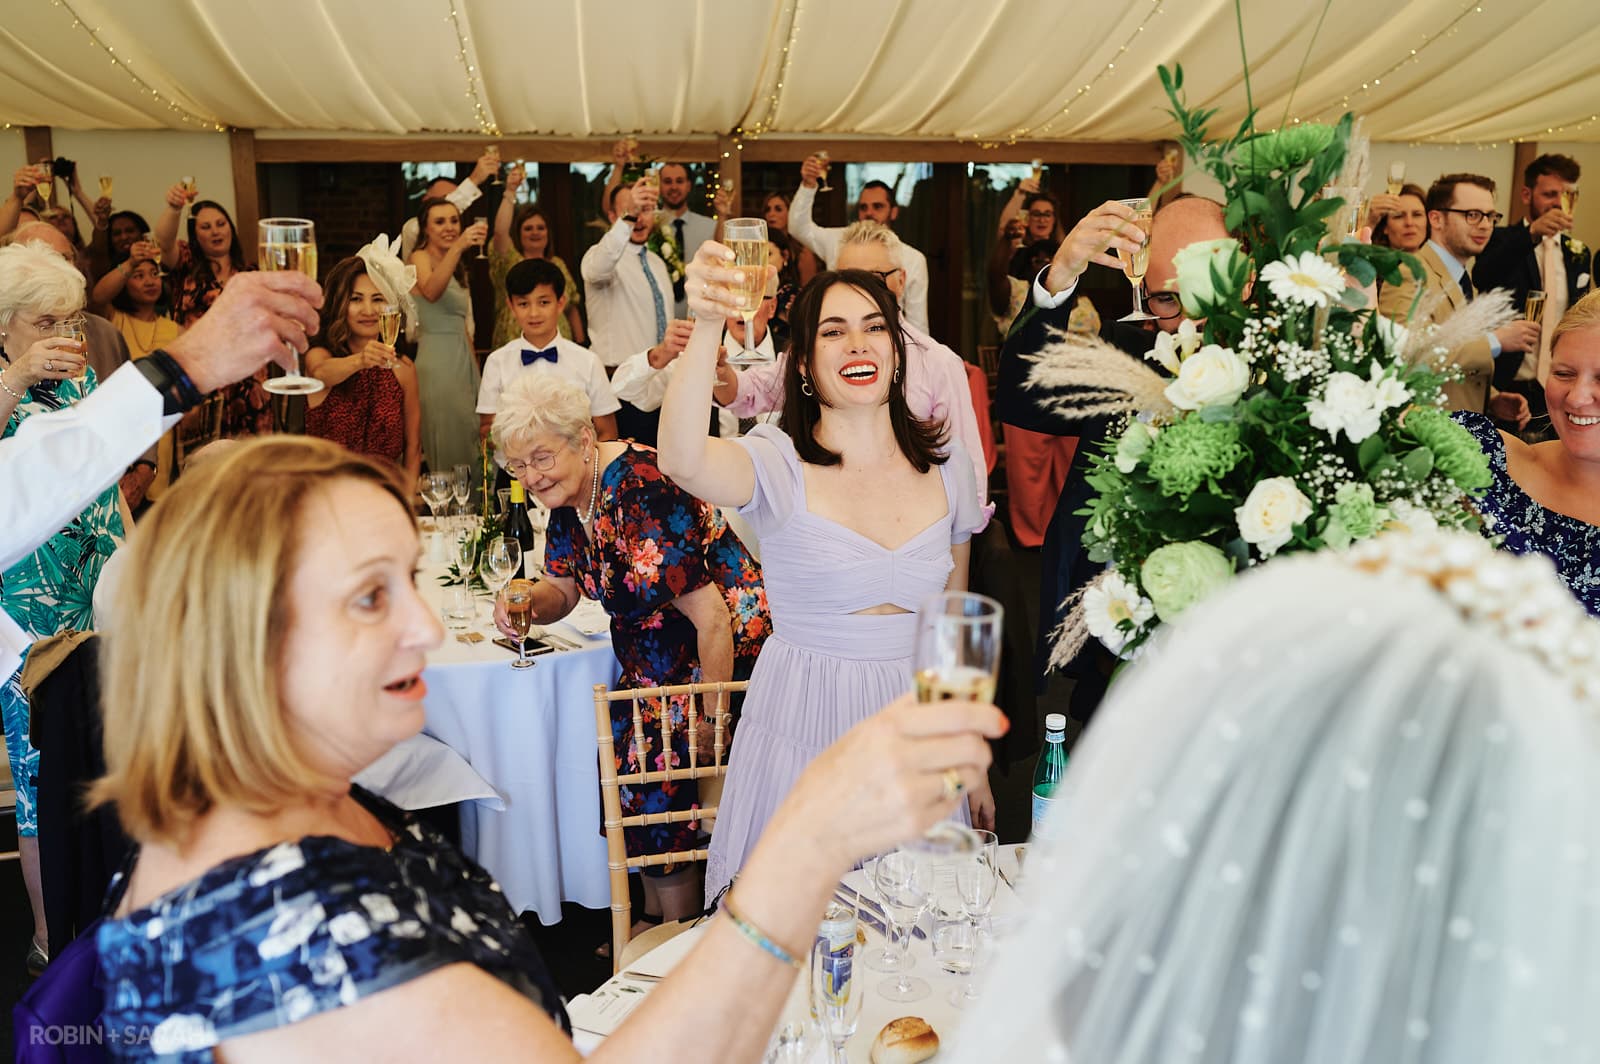 Wedding guests raise a toast during speeches